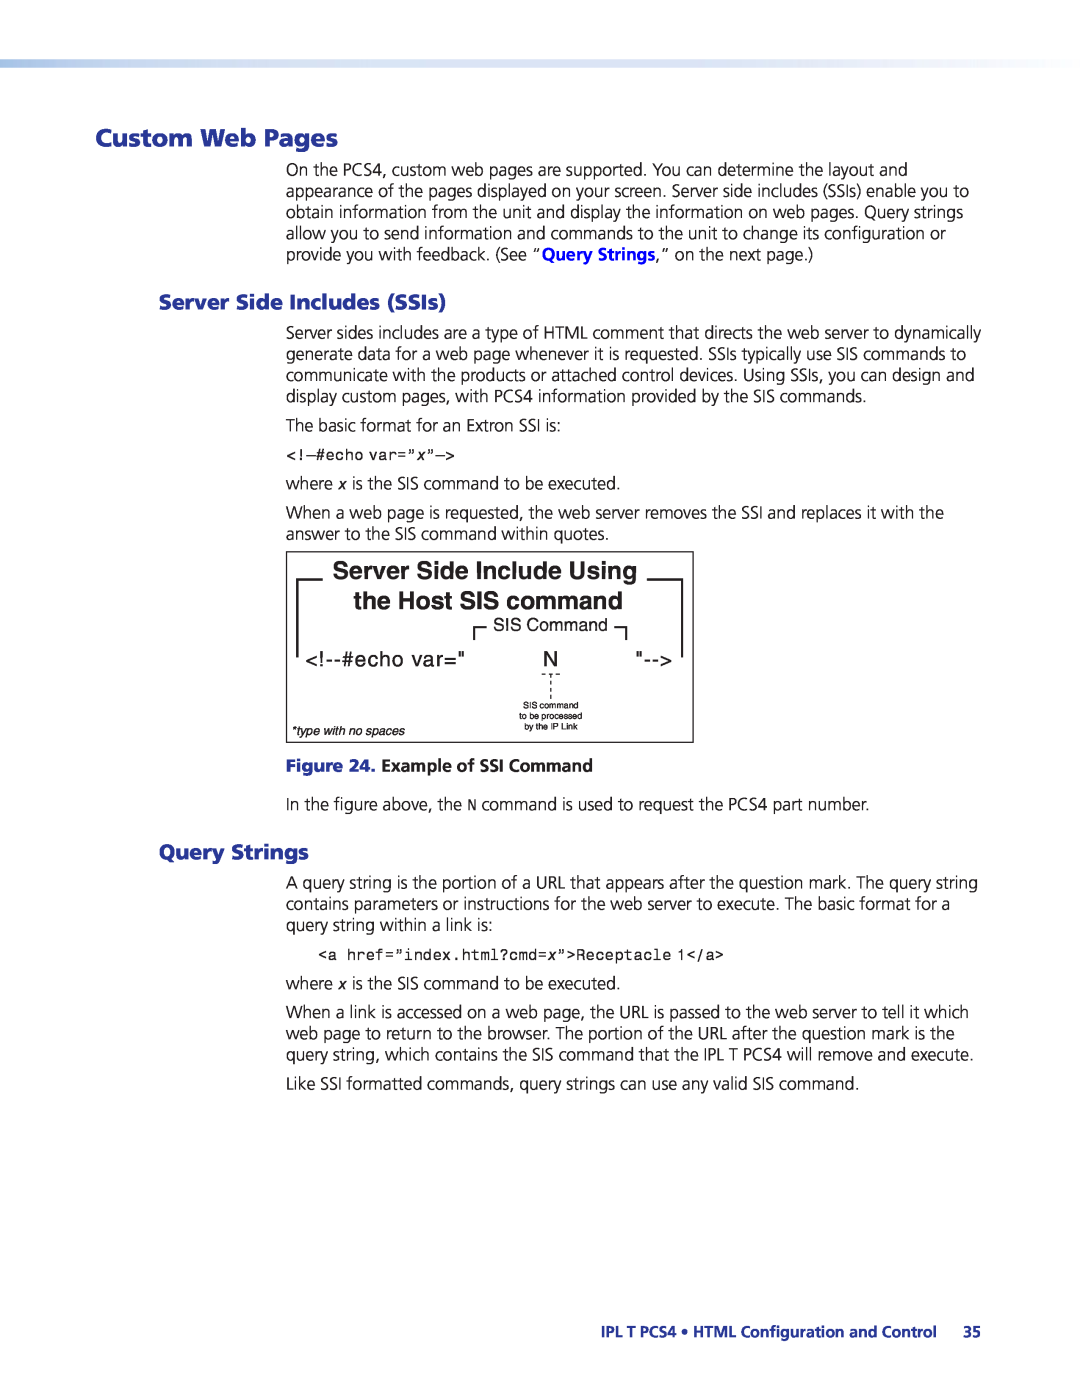 Extron electronic IPL T PCS4i manual Custom Web Pages, Server Side Includes SSIs, #echo var=, Query Strings 